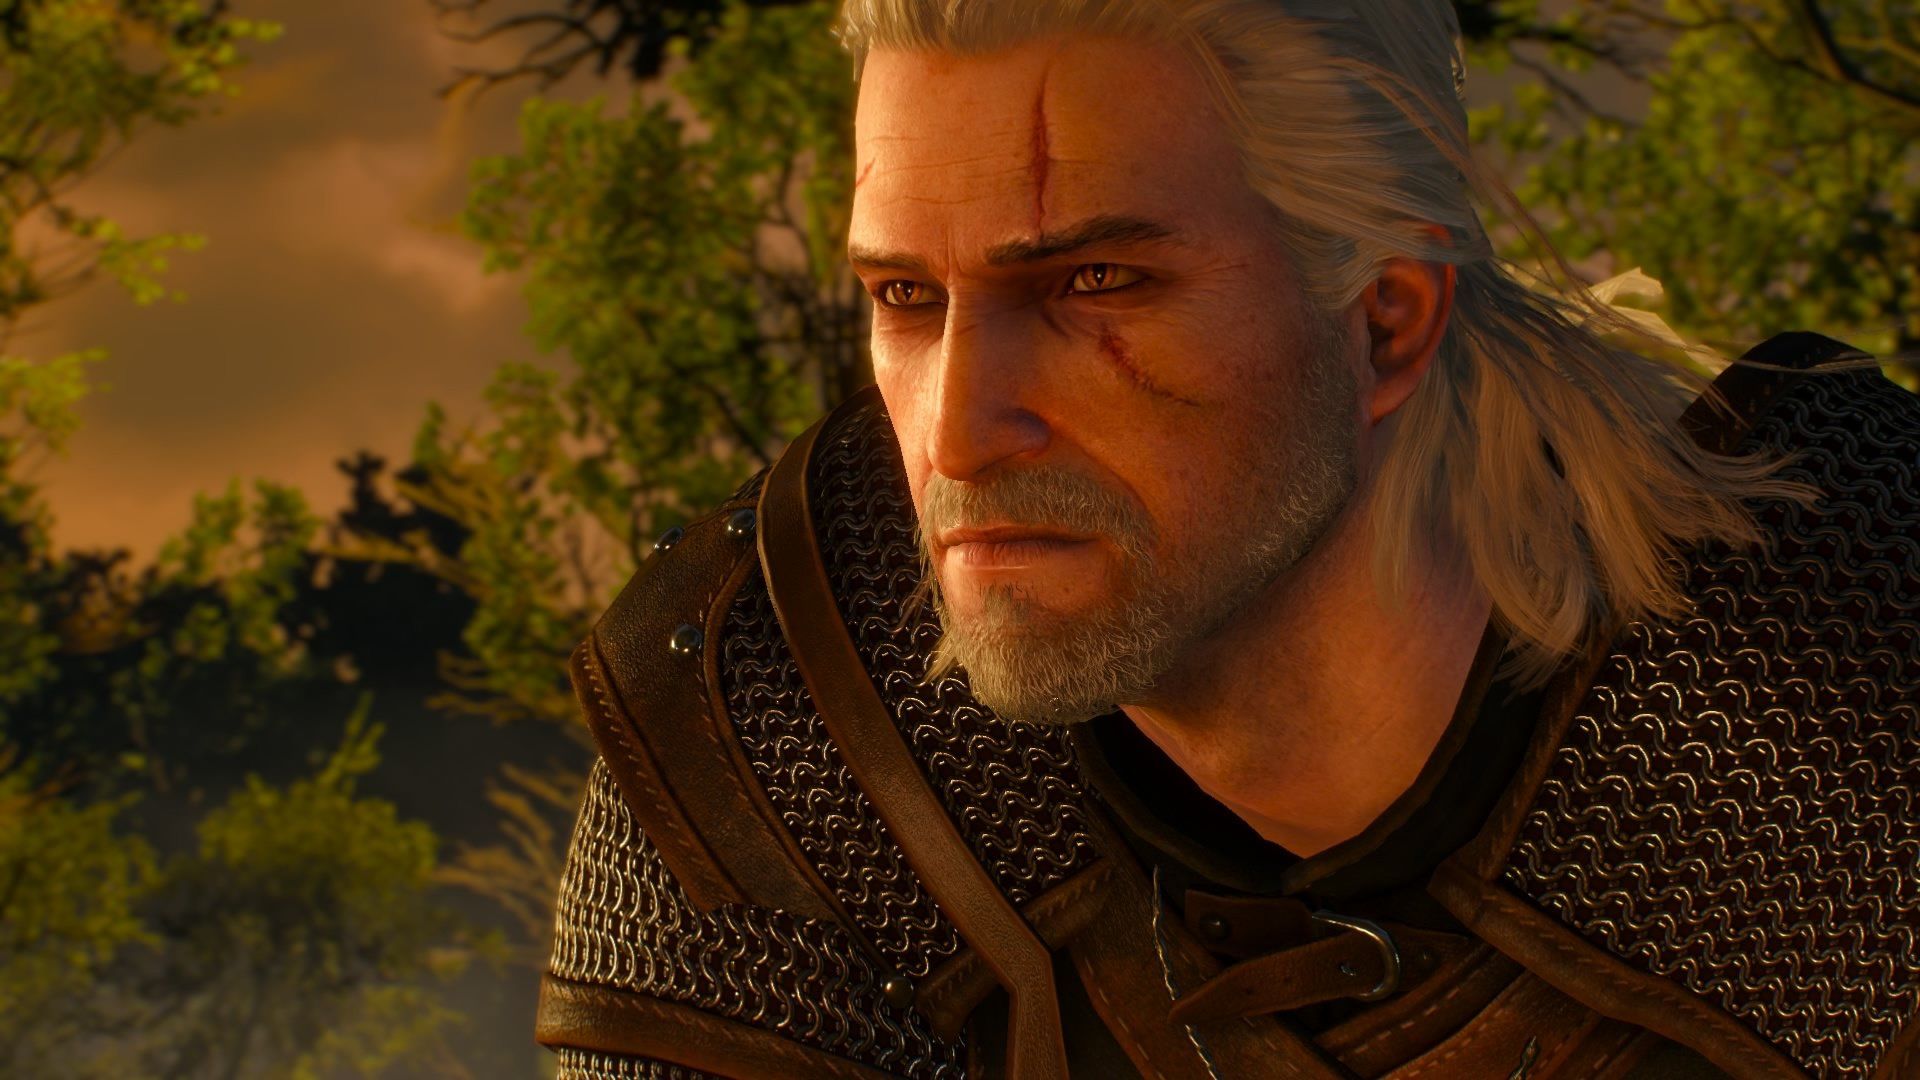 geralt side profile shot with field background.